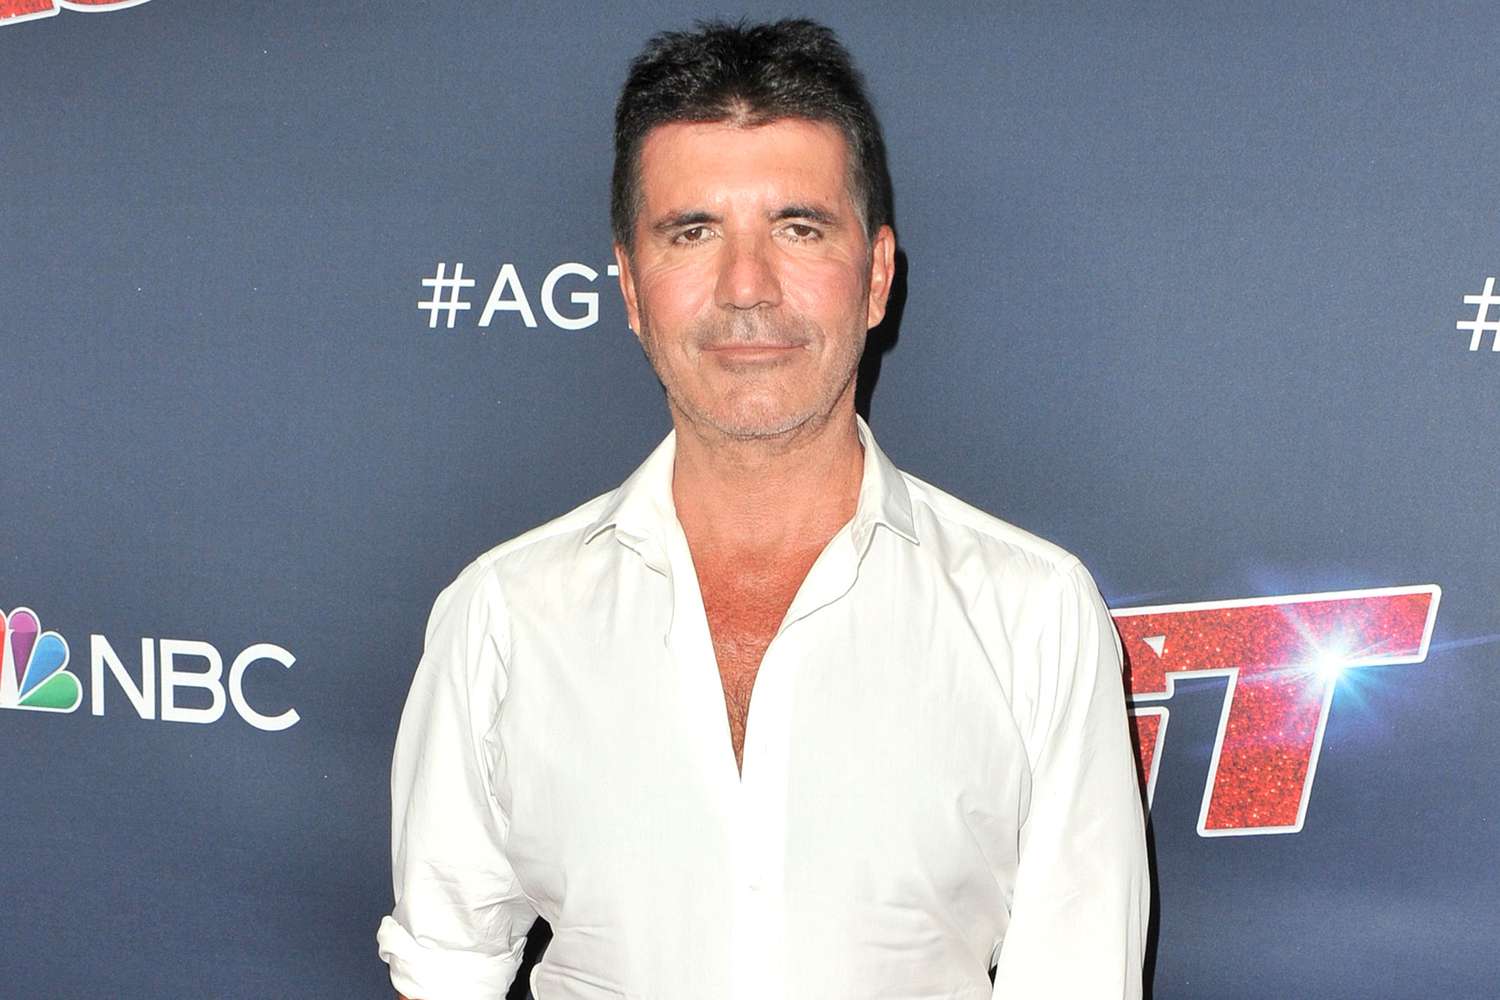 Simon Cowell hospitalized after breaking back in biking accident